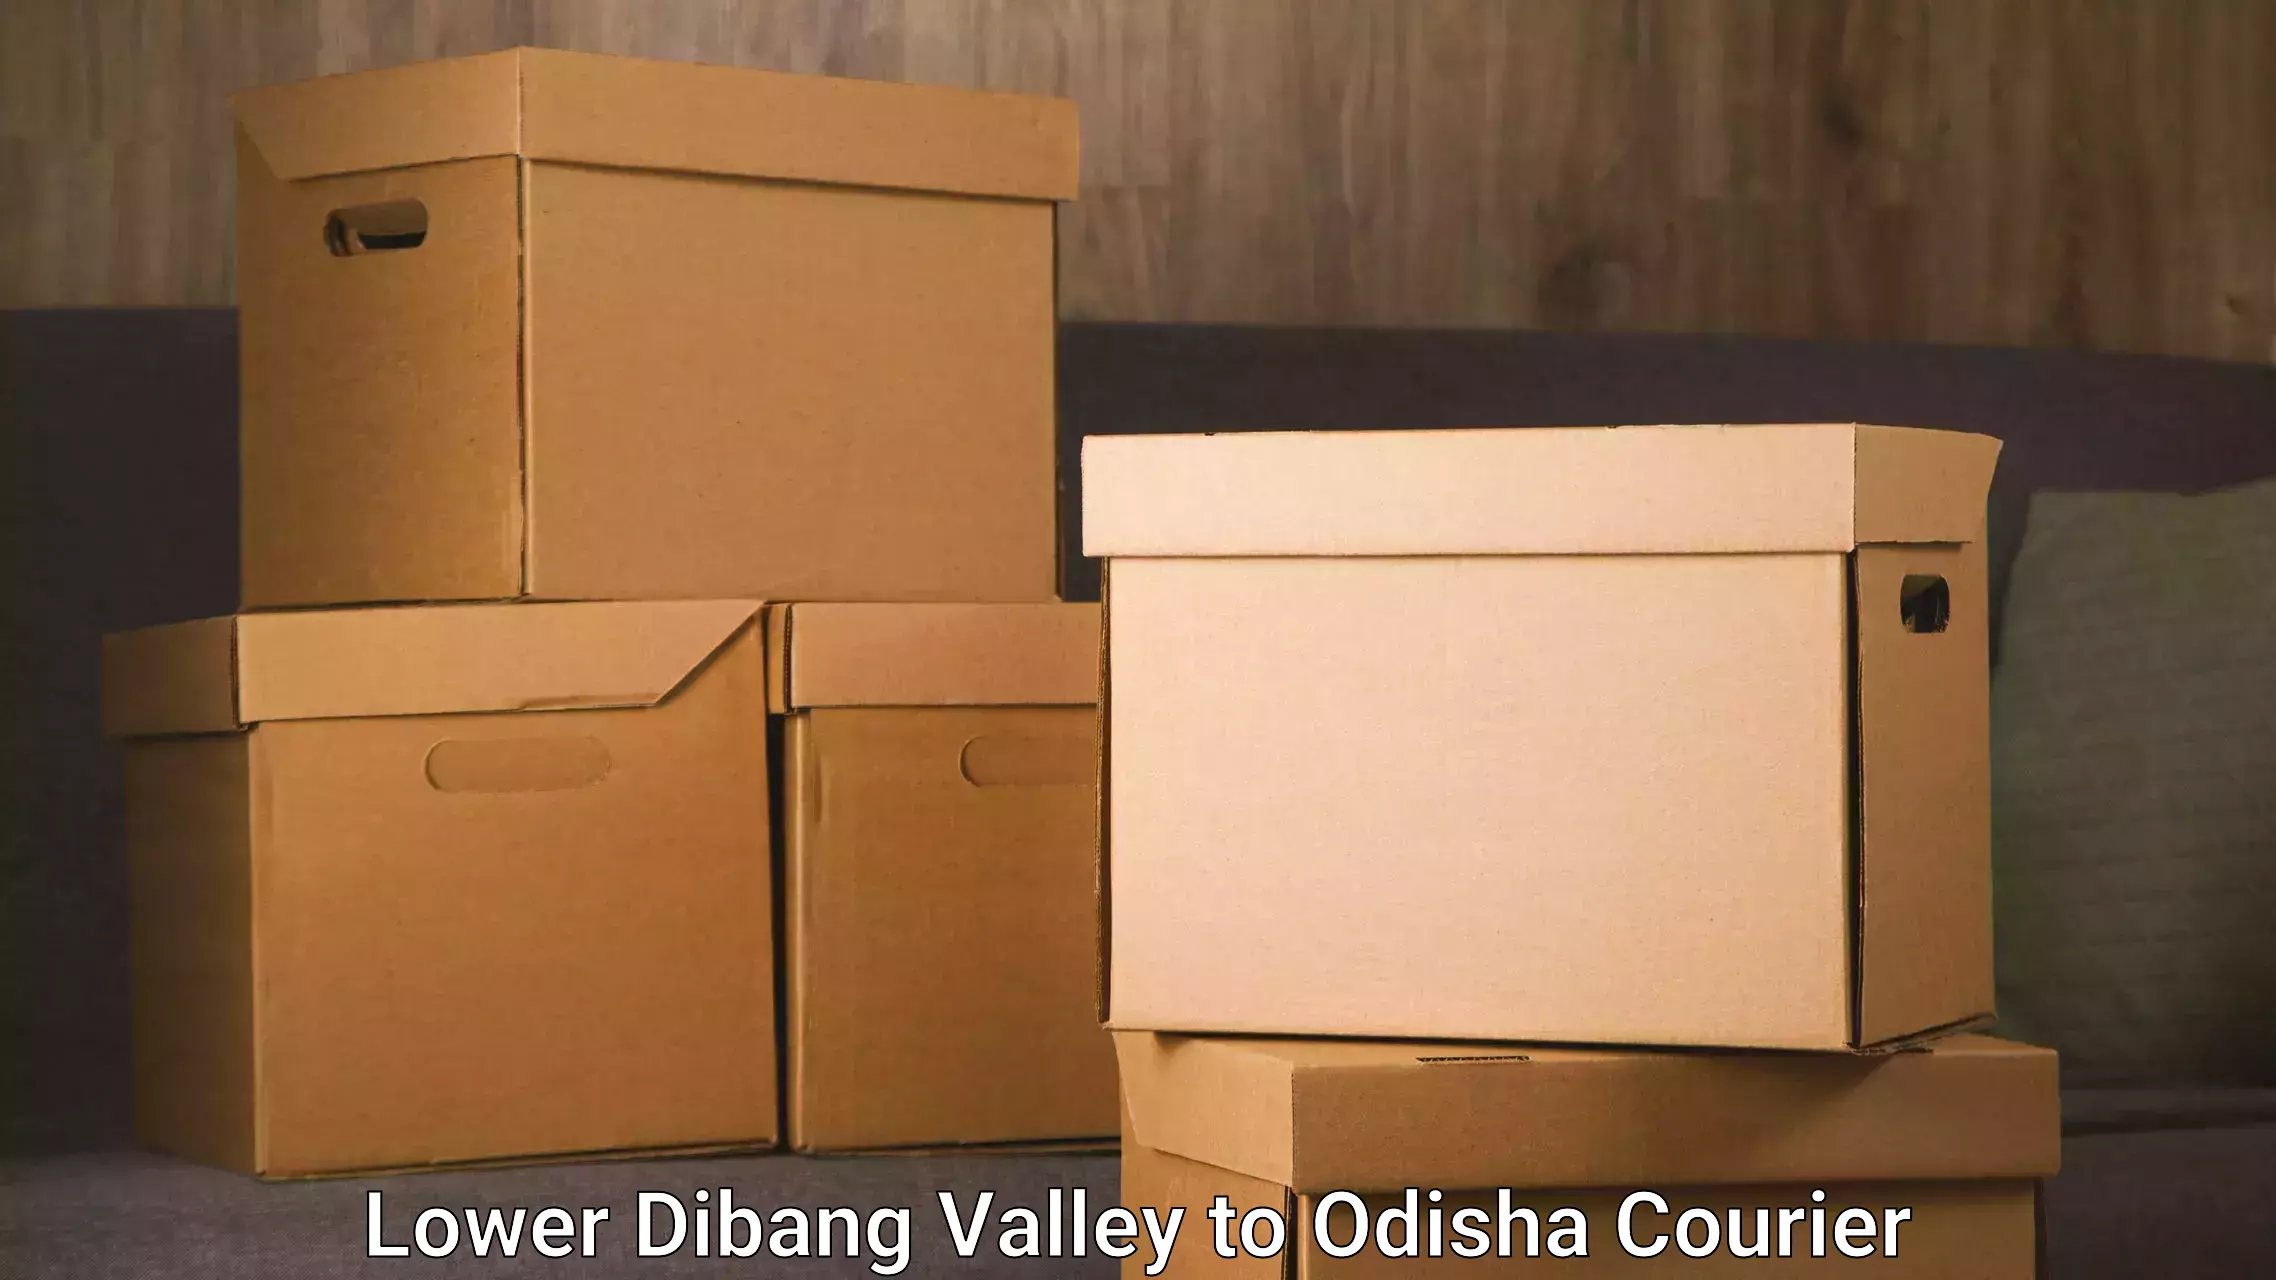 Doorstep delivery service in Lower Dibang Valley to Ghuntagadia